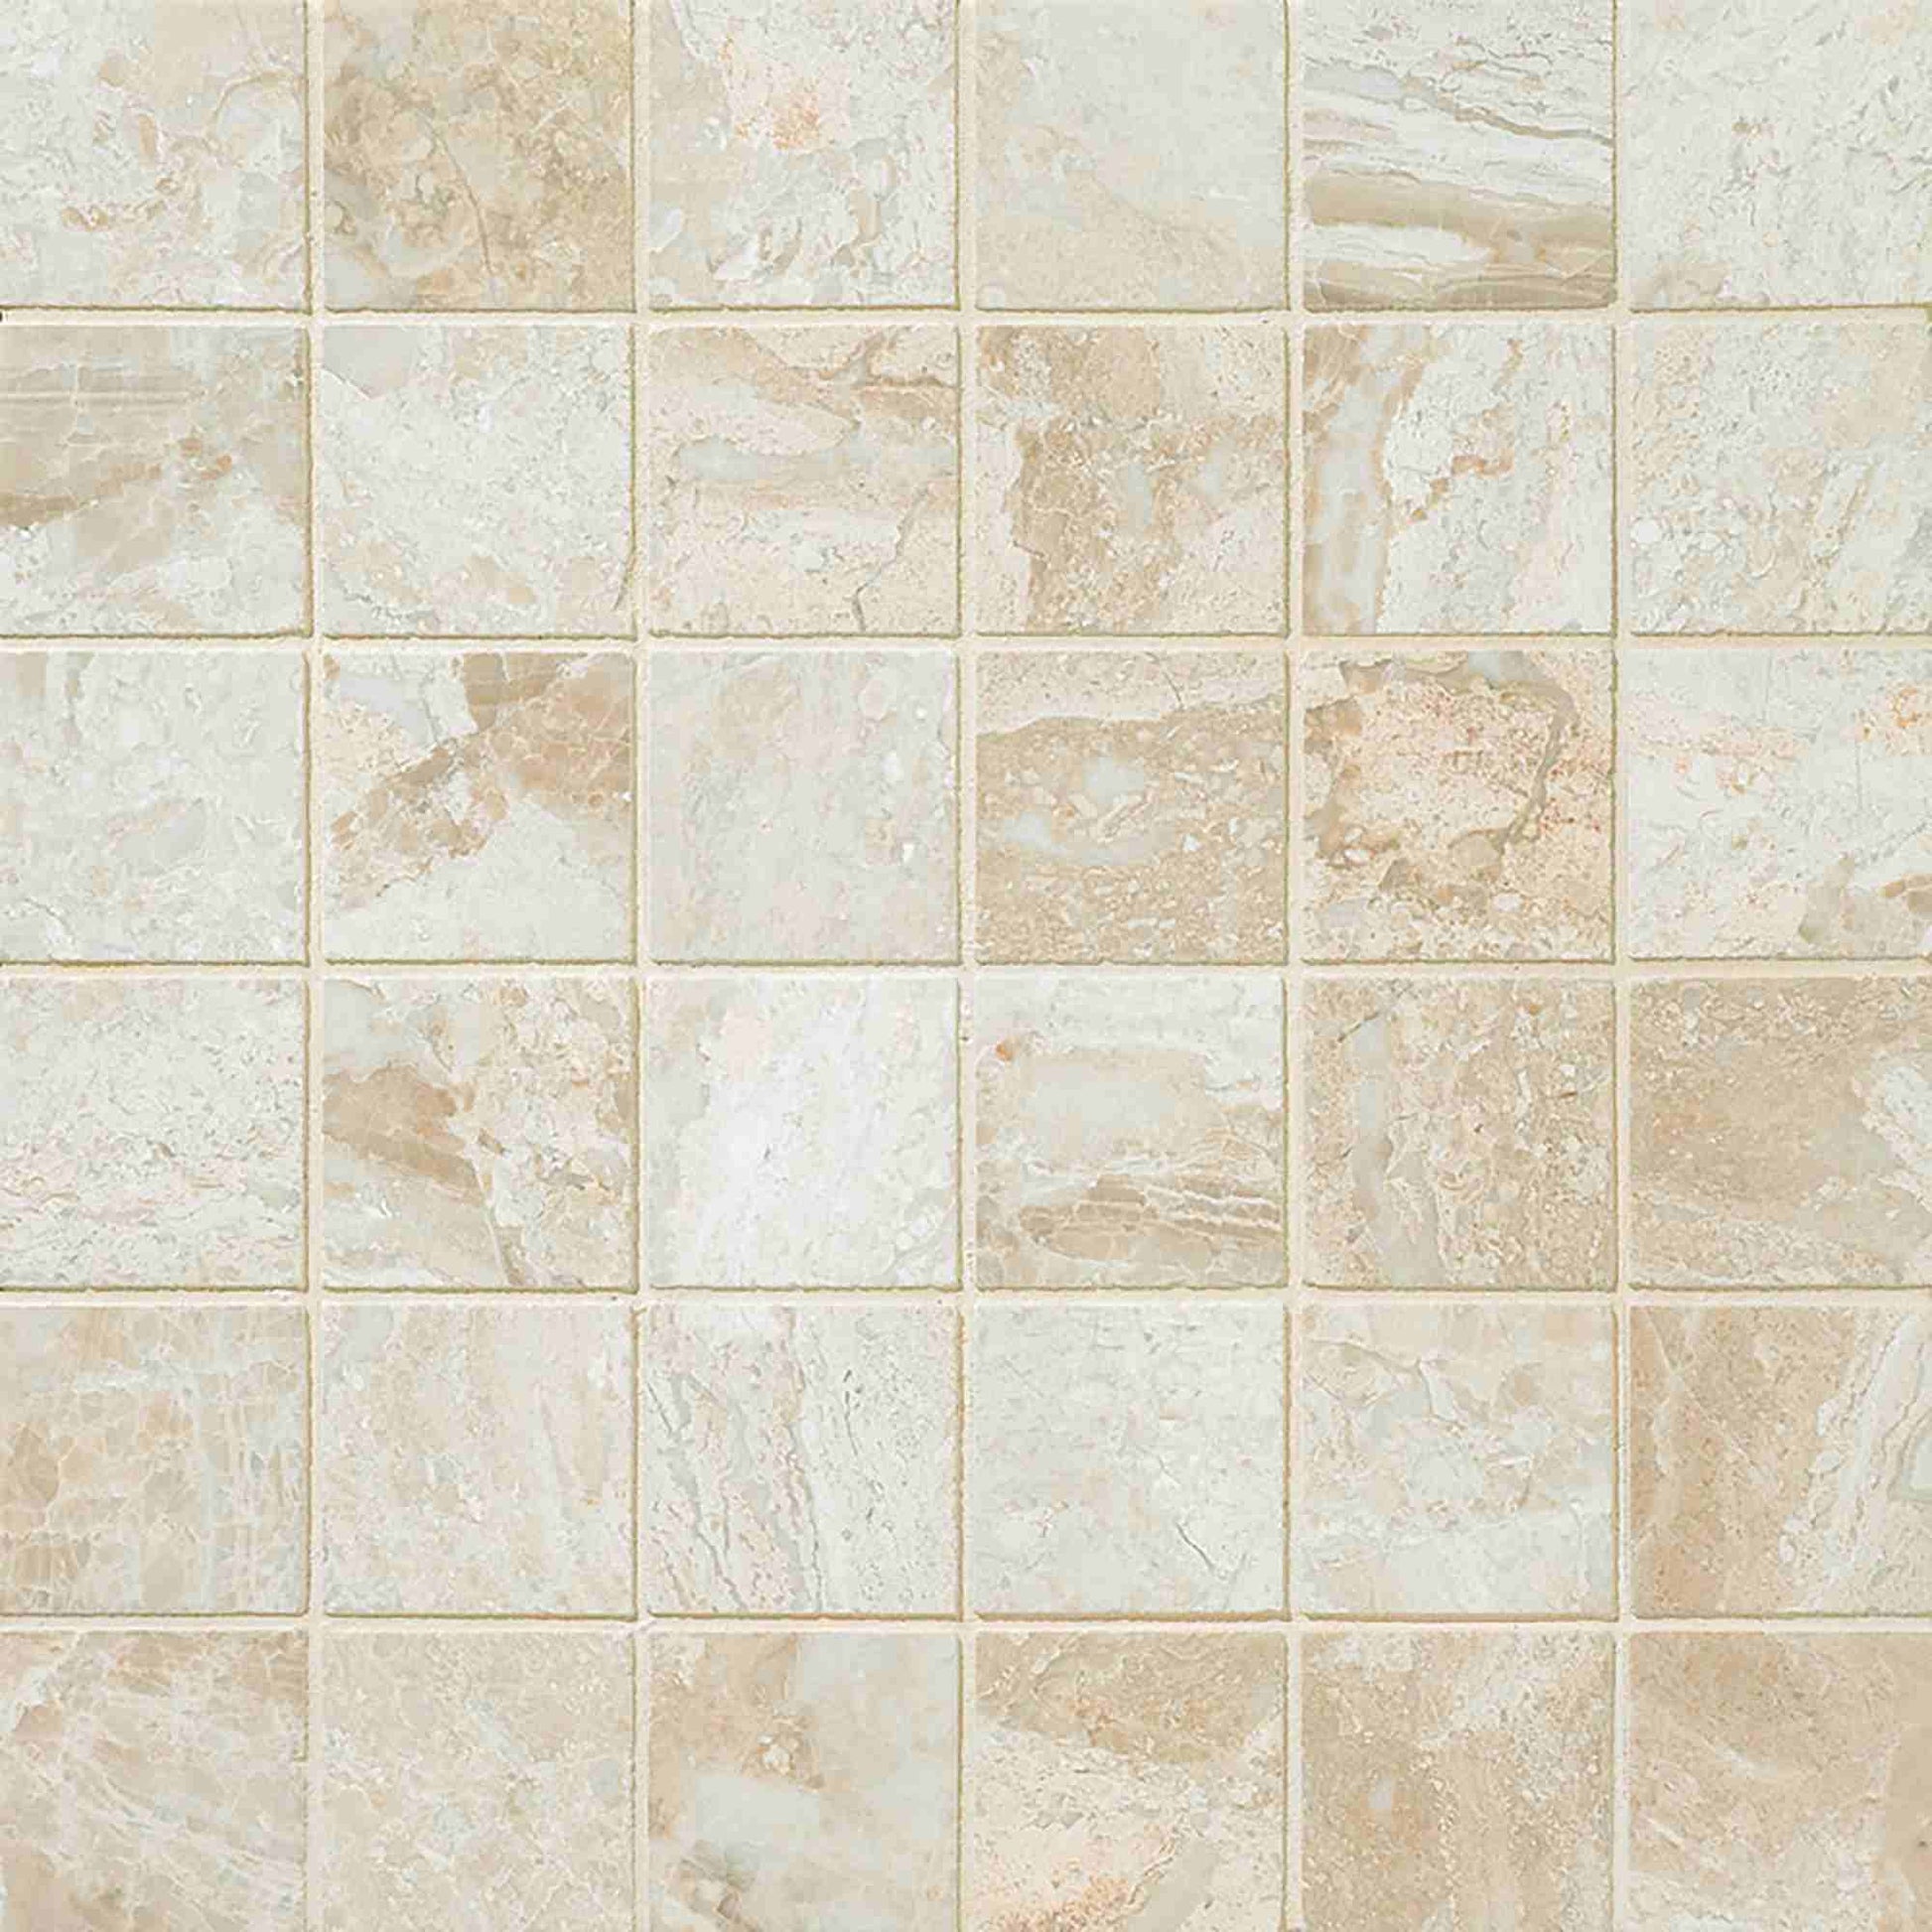 Queen Beige Polished Square Mosaic Tile 1x1"